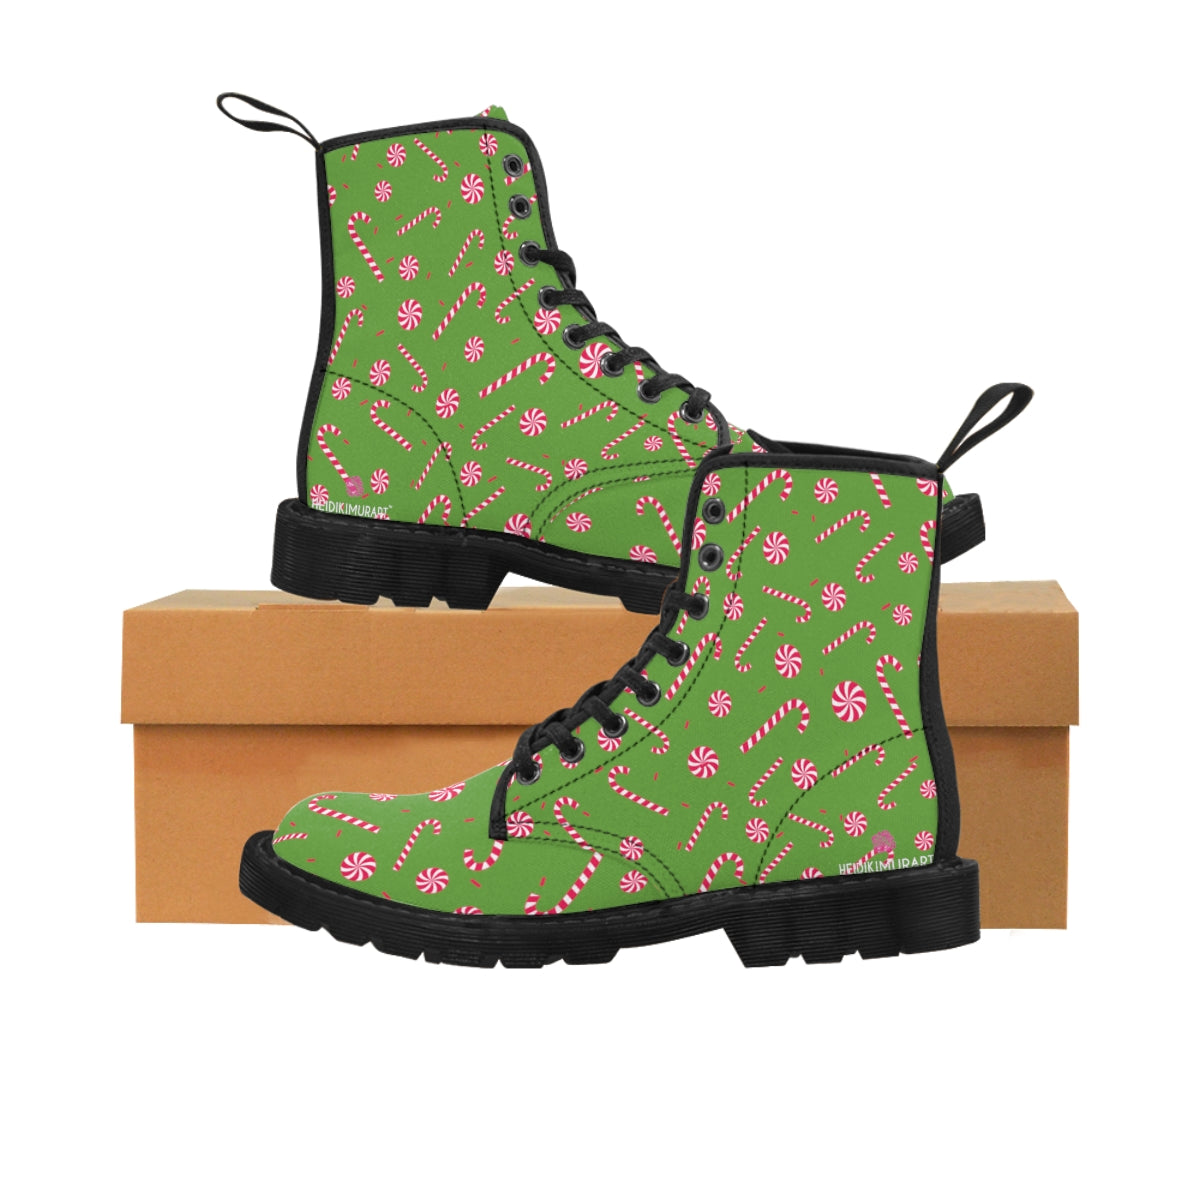 Light Green Christmas Women's Canvas Boots, Red Candy Cane Color Laced Up Winter Fashion Boots, Classic Christmas Festive Holiday Party Fun Designer Women's Winter Lace-up Toe Cap Ankle Hiking Boots (US Size 6.5-11) Casual Fashion Winter Boots For Ladies